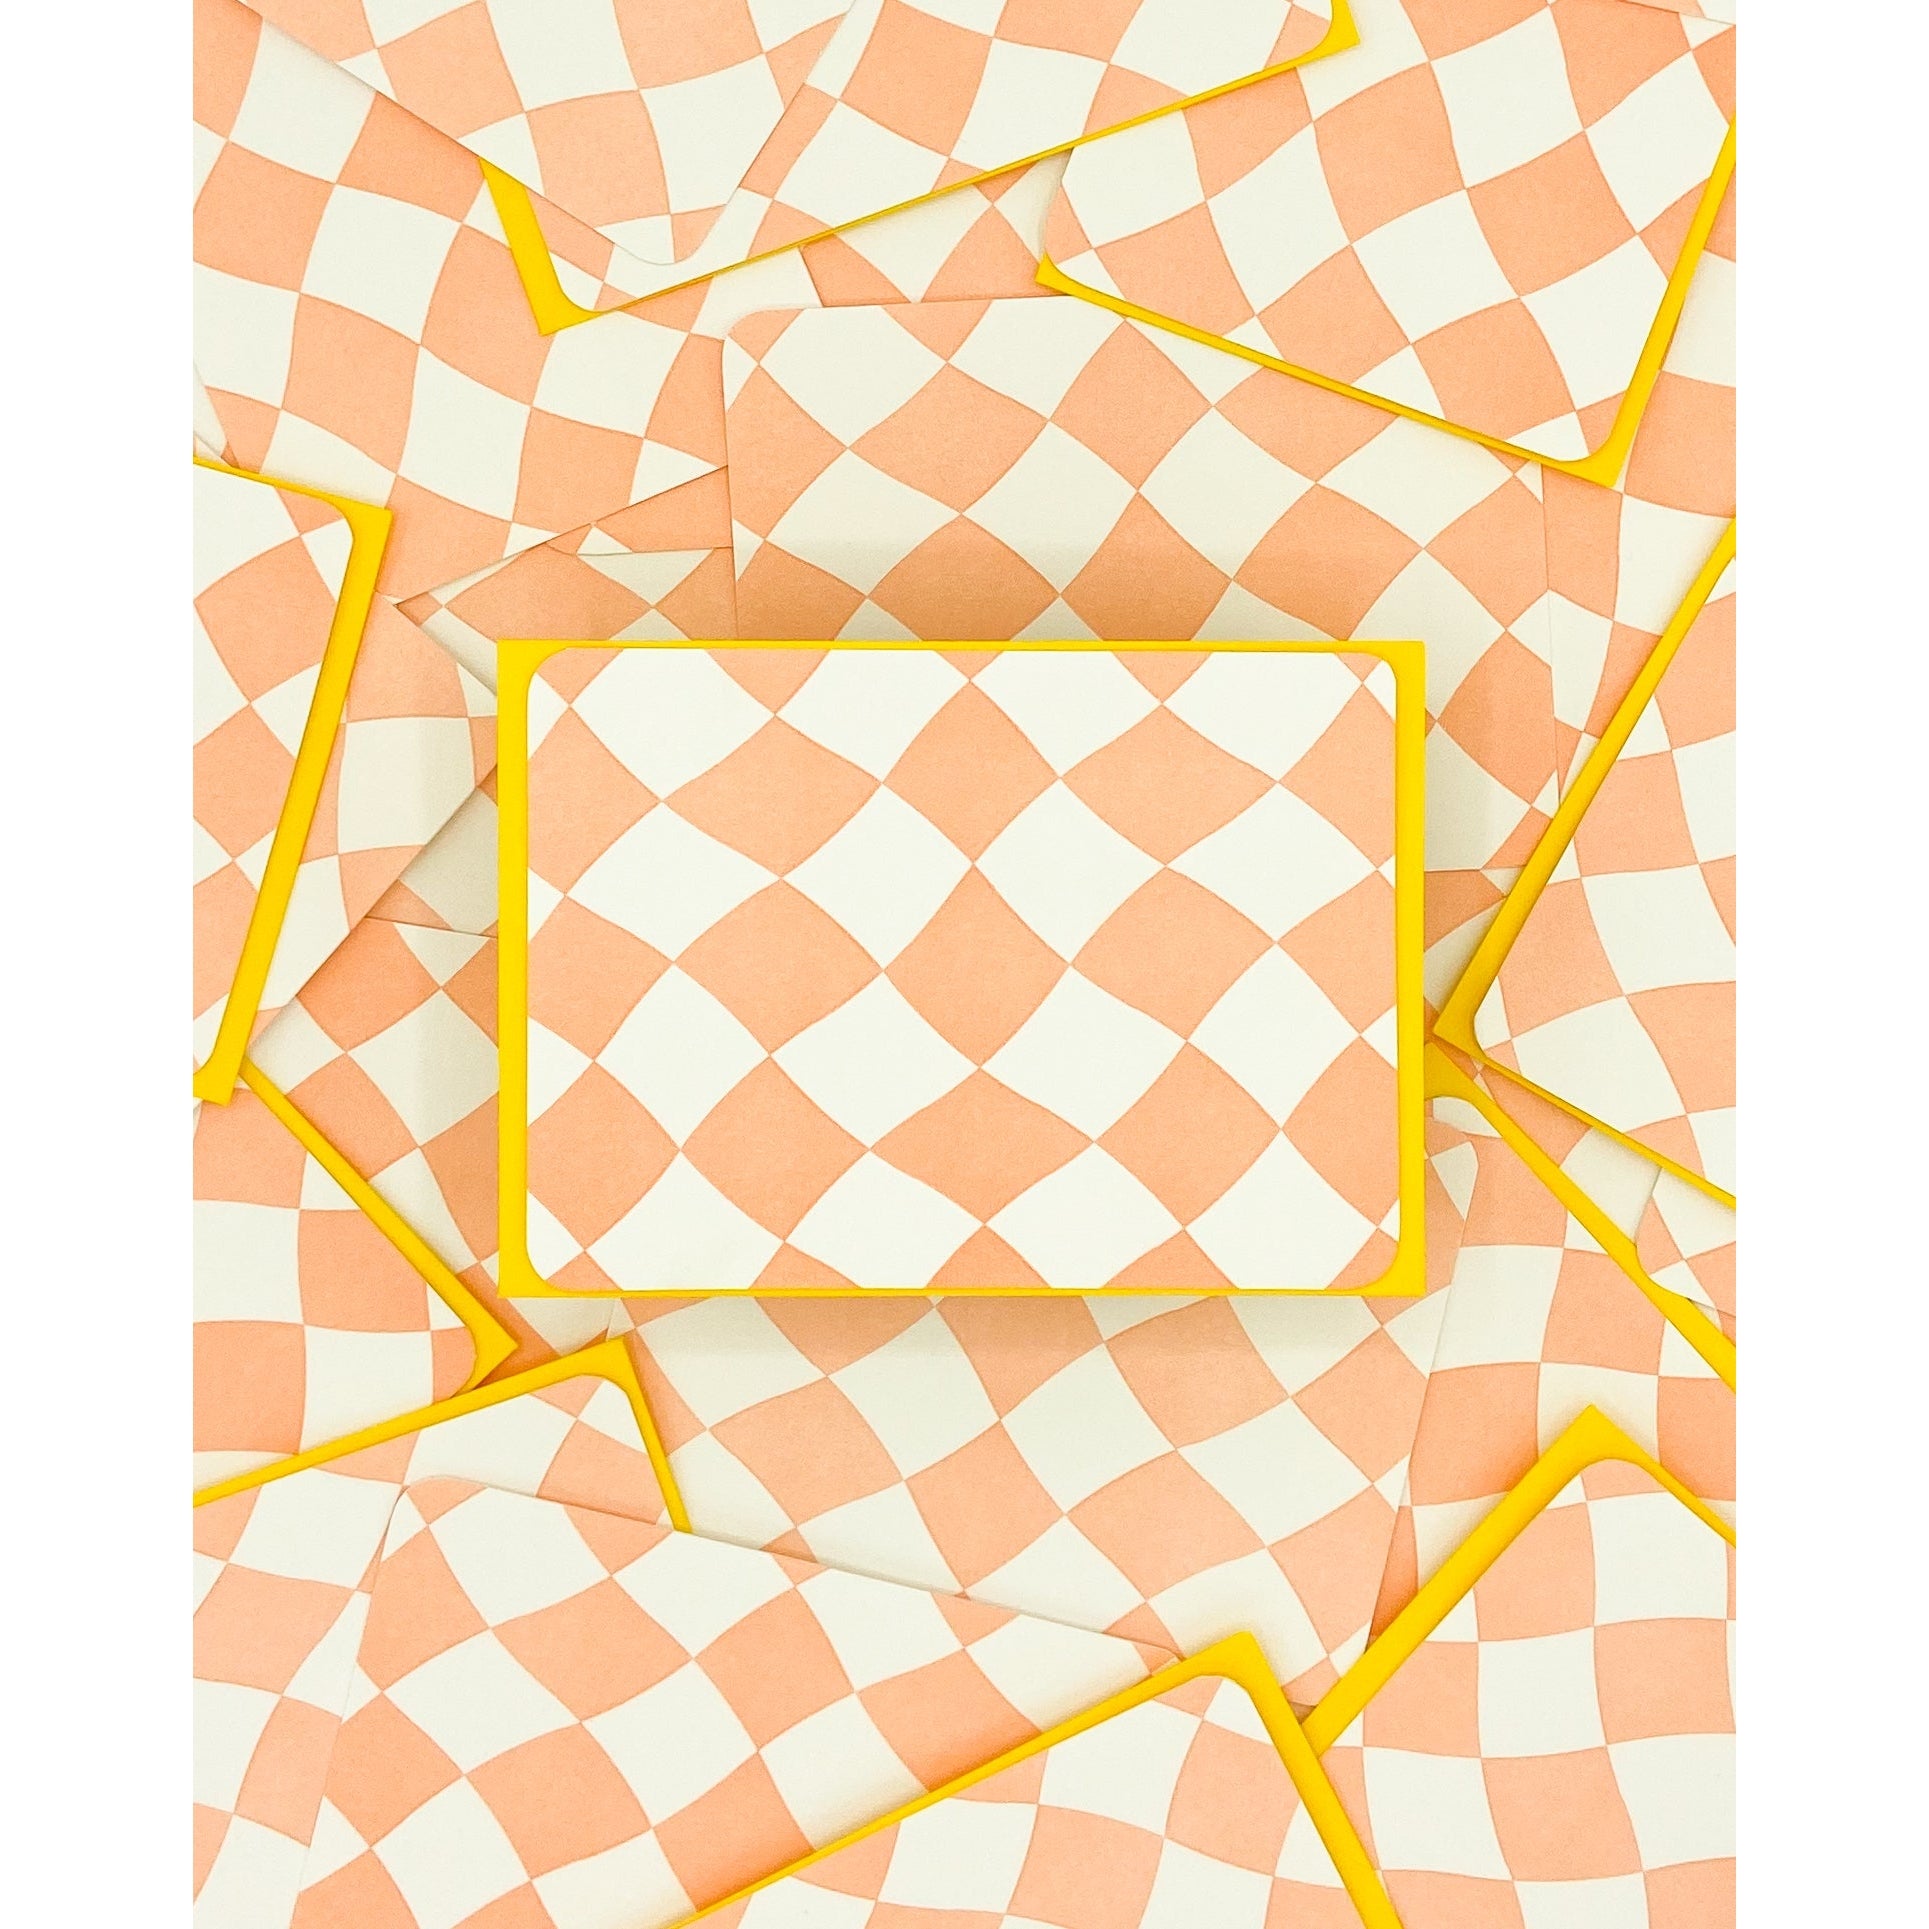 Peach and white wavy checkered pattern with neon yellow envelopes.             